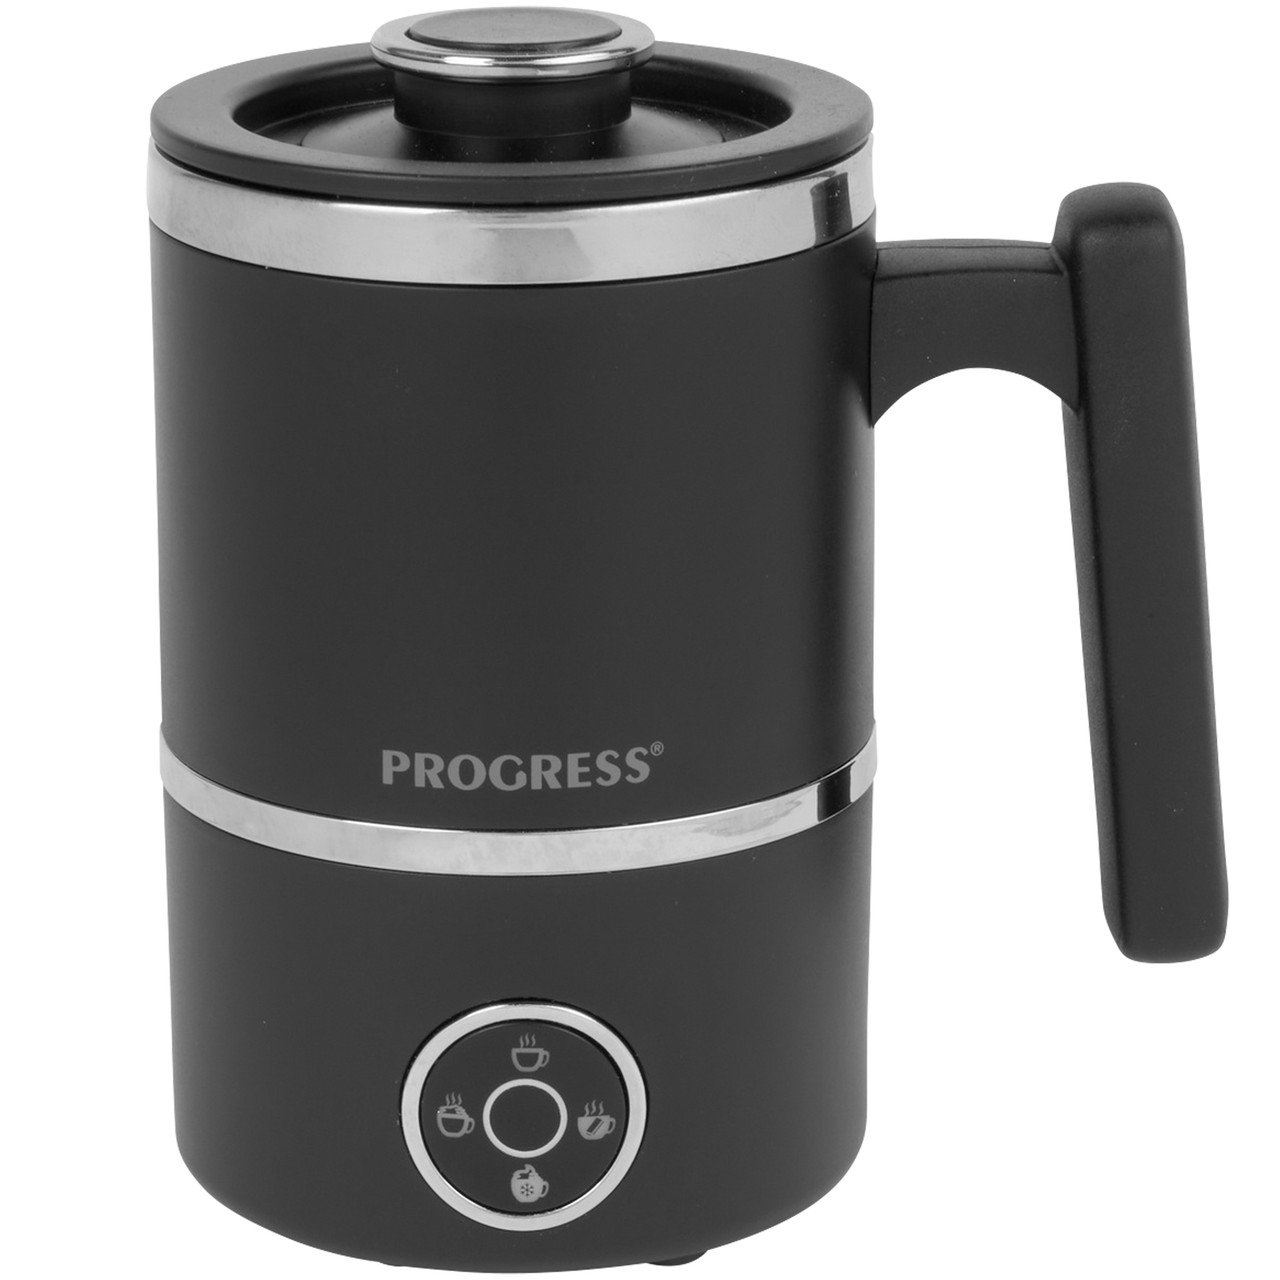 https://cdn11.bigcommerce.com/s-x0ht6cfst9/images/stencil/1280x1280/products/7491/279556/progress-chocoluxe-electric-hot-chocolate-maker-300ml150ml-non-stick-milk-steamerfrother-cold-function-for-iced-coffee-and-frappes-400w-hotcold-lightthick-foam-frothing-whisk-included-ek5133p-5054061498714__08759.1698675658.jpg?c=1